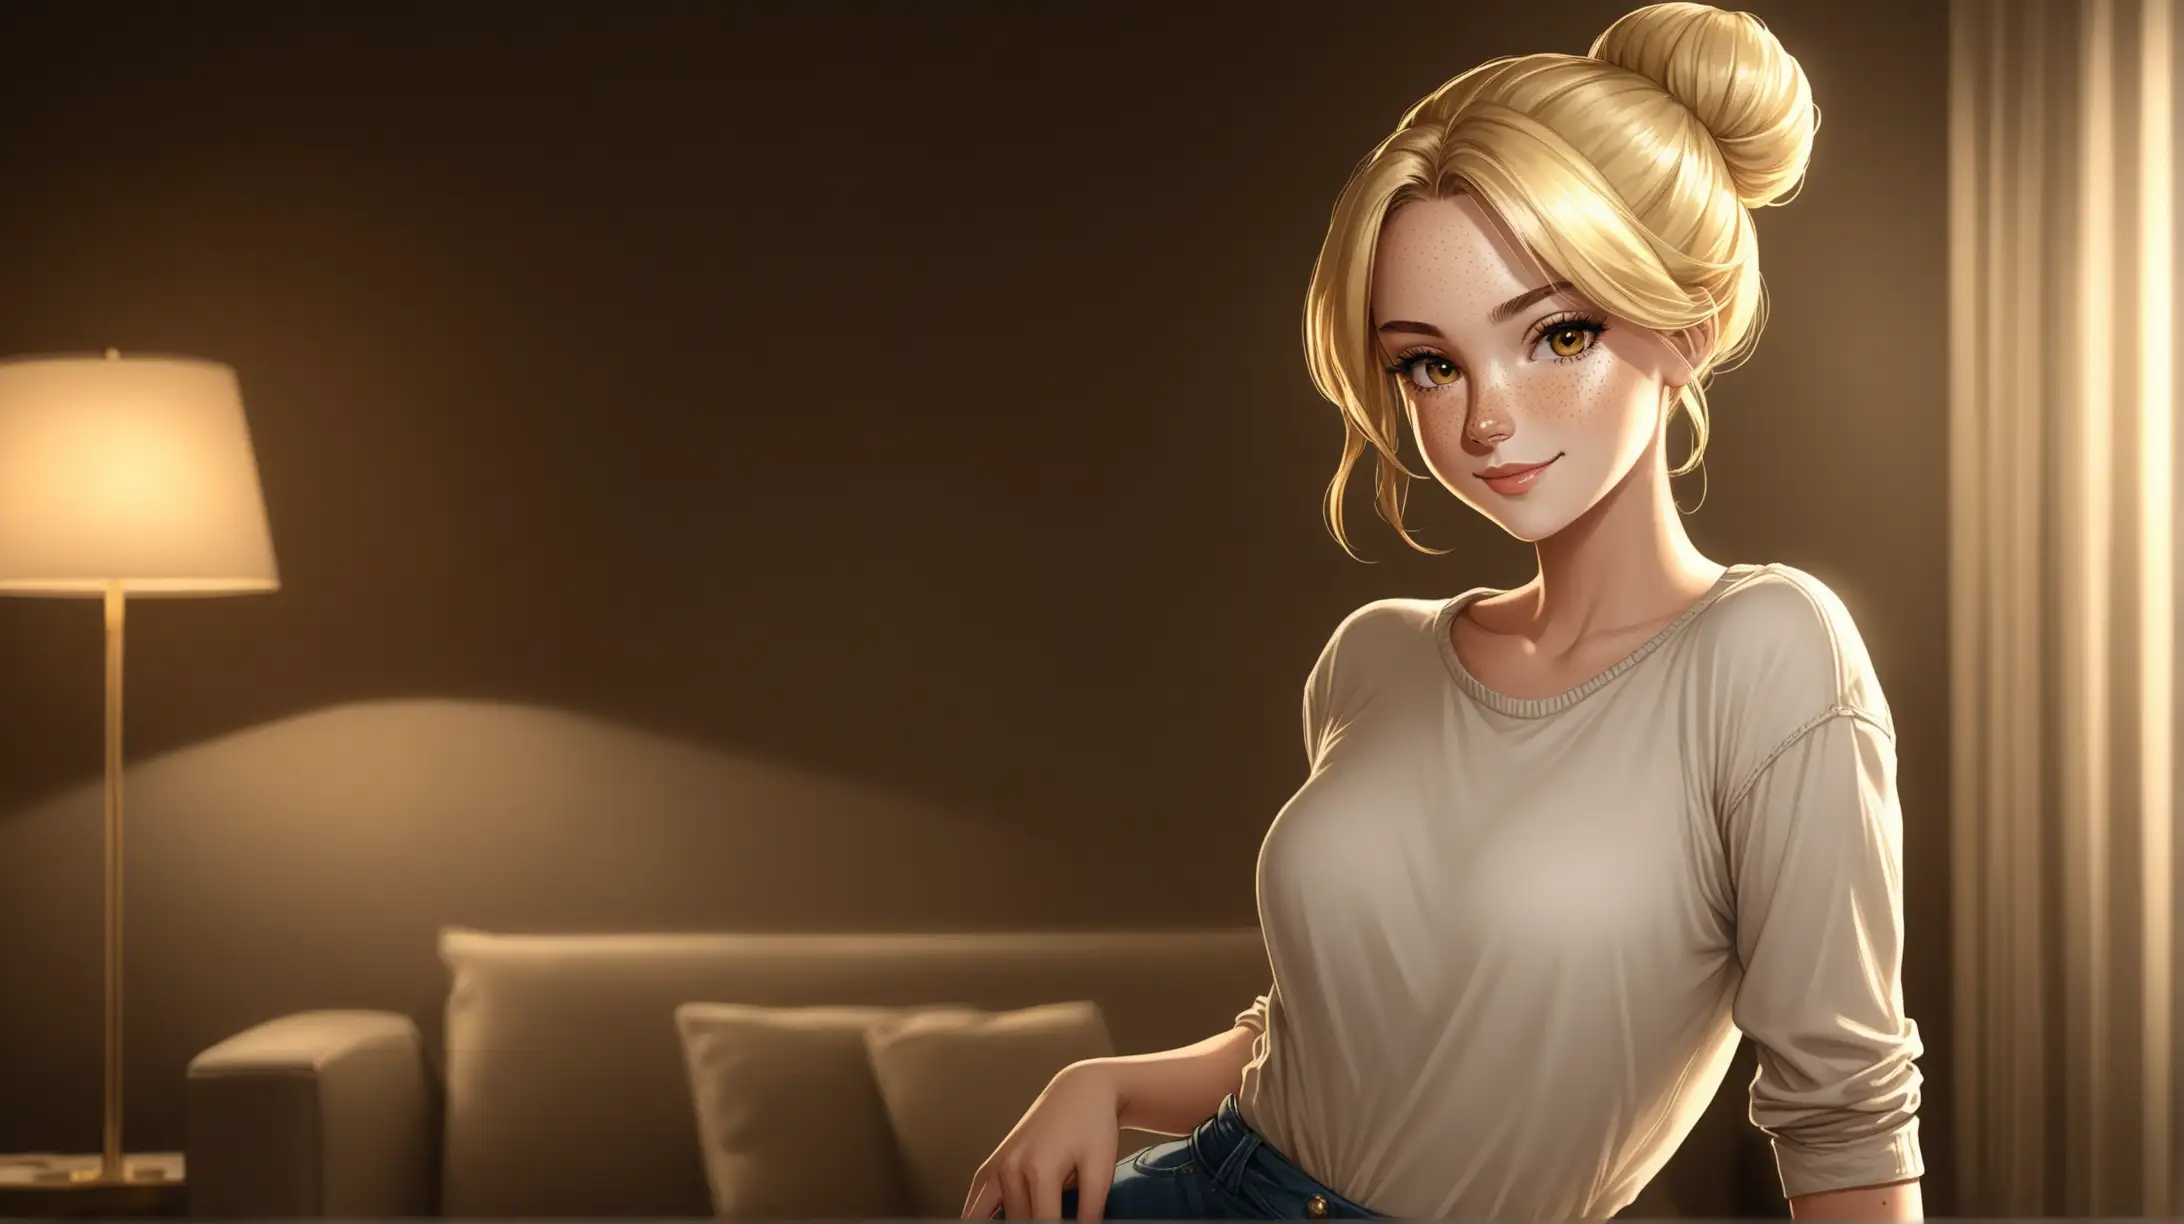 Draw a woman, long blonde hair in a bun, gold eyes, freckles, perky figure, casual outfit, high quality, cowboy shot, indoors, seductive pose, dim lighting, smiling at the viewer